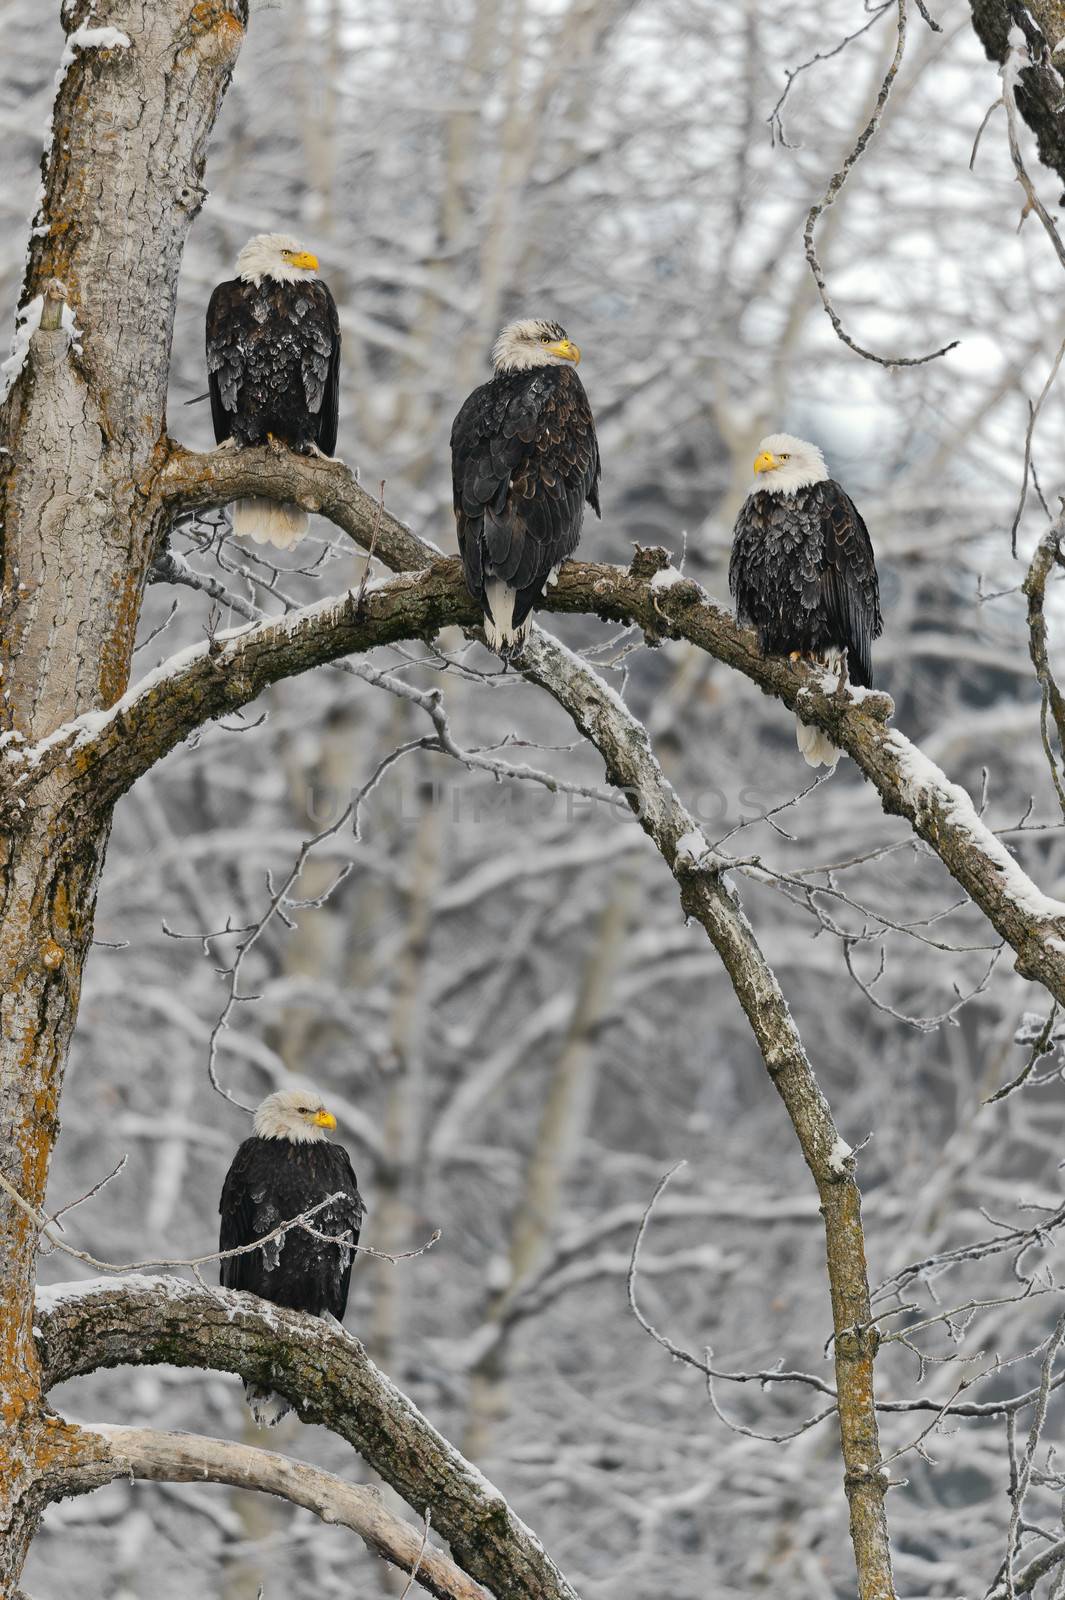 Four Bald eagles are sitting on the snow branches by SURZ